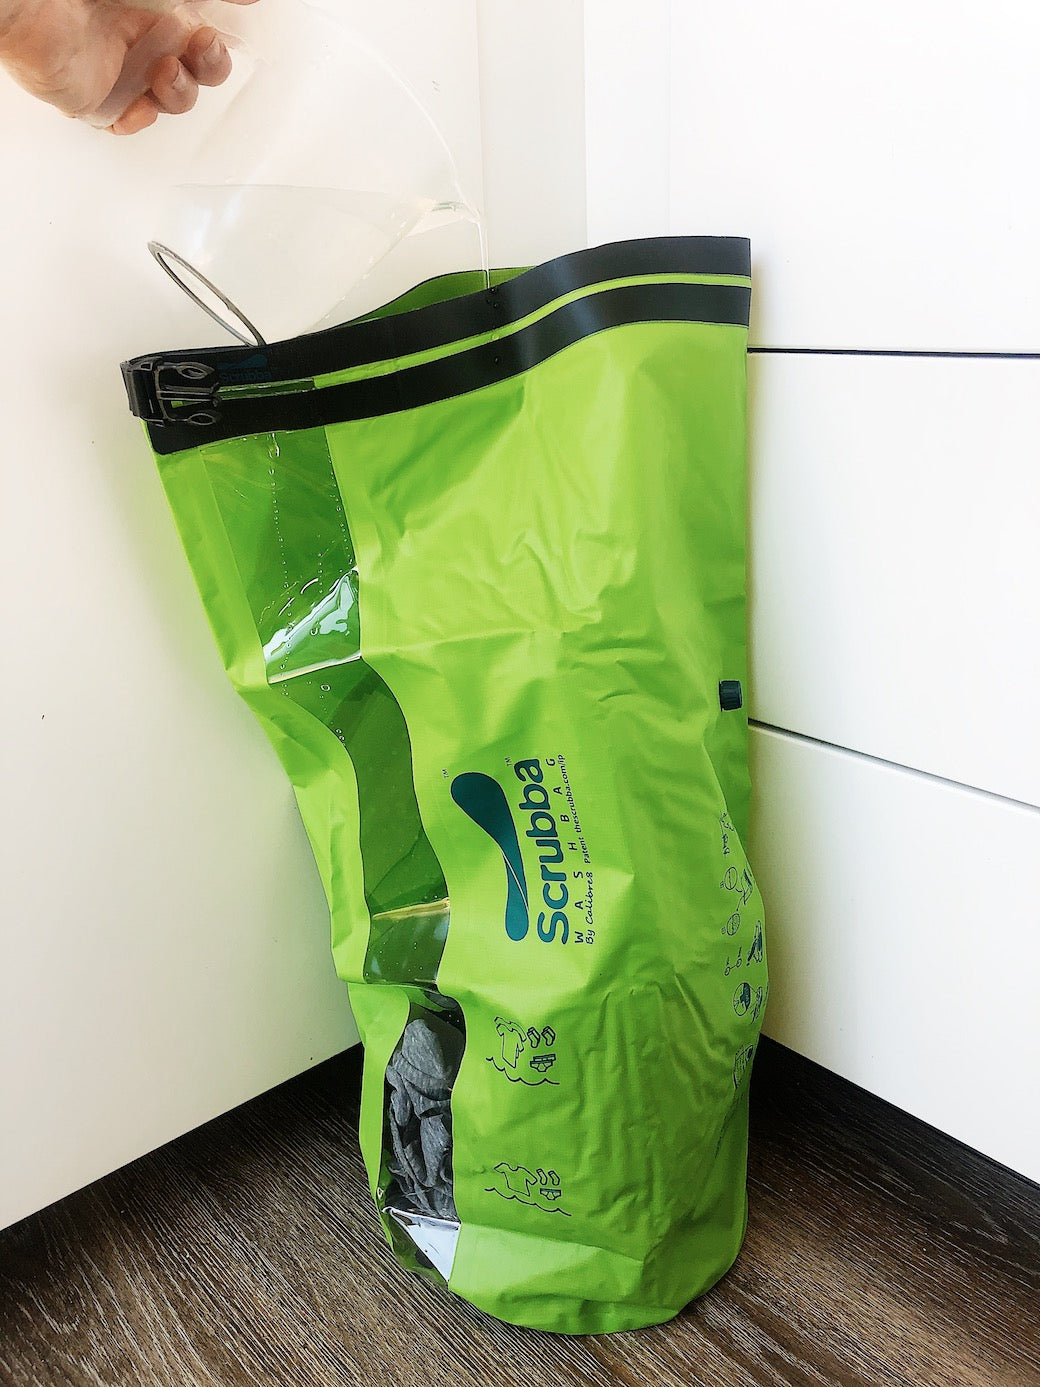 Scrubba Wash Bag Review - The Best Travel Laundry Bag?